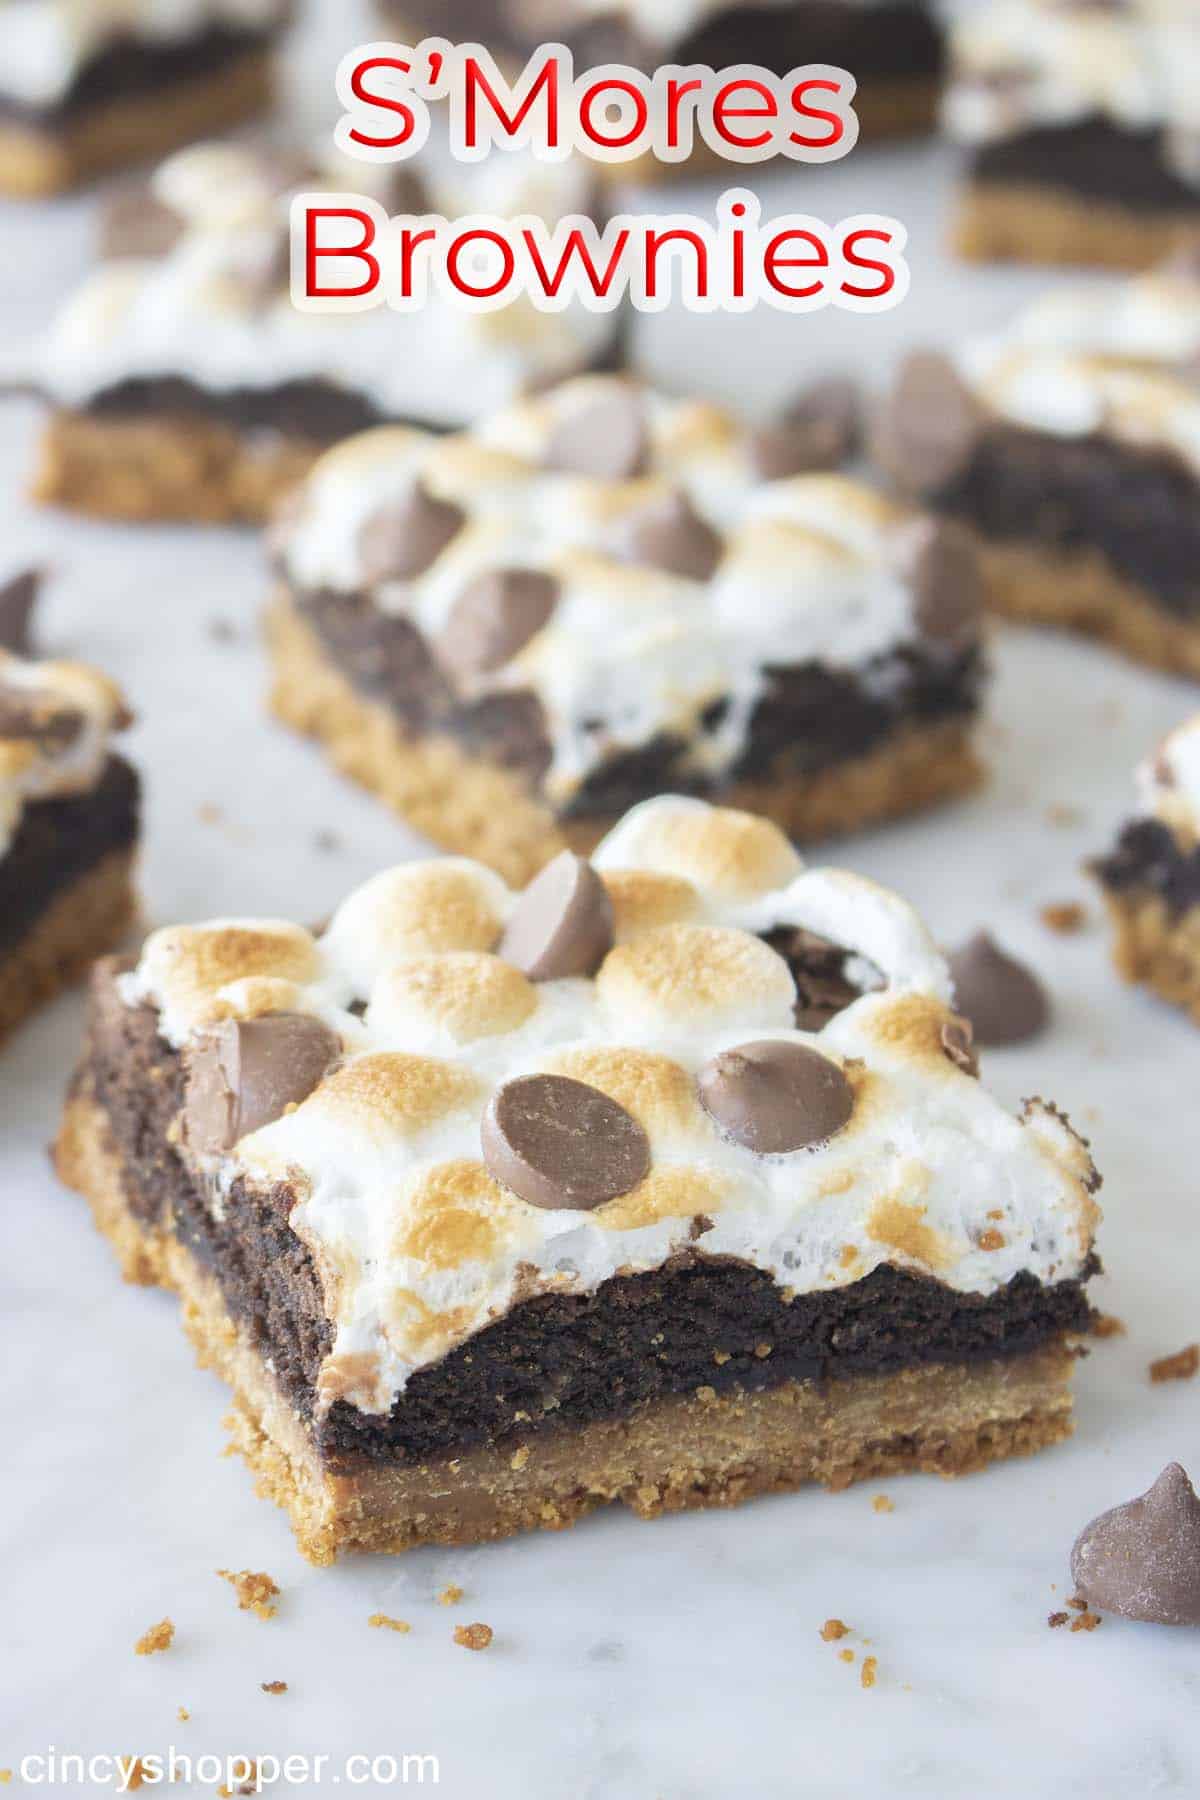 Text on image S'mores Brownies